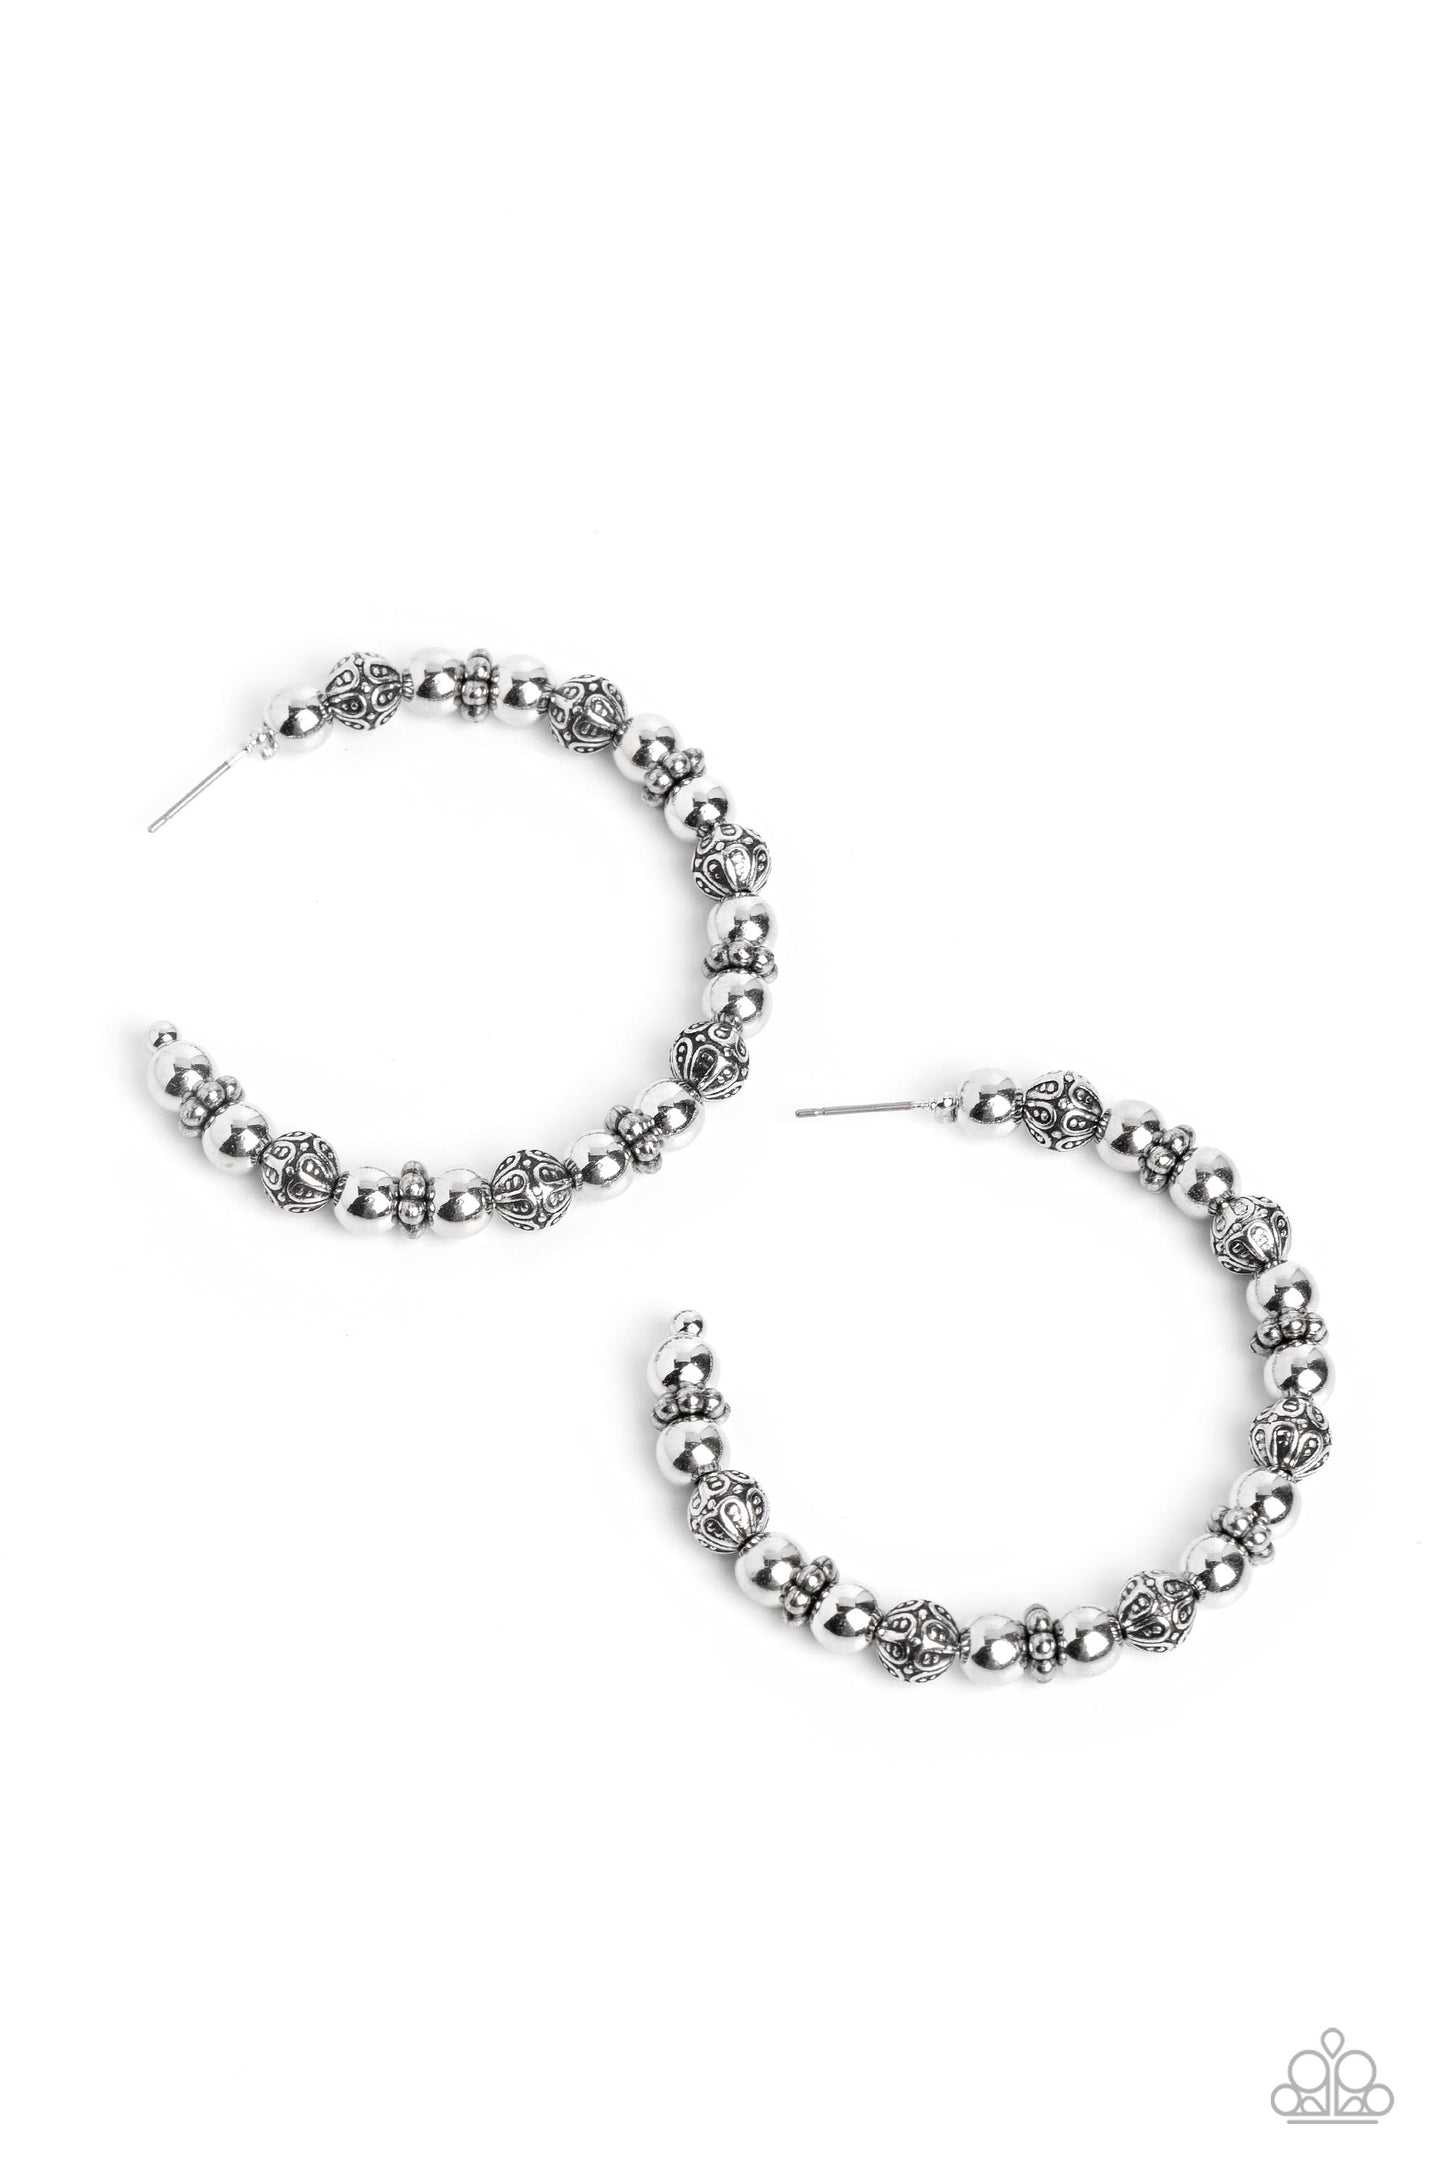 Rebuilt Ruins Silver Hoop Earring - Paparazzi Accessories  A collection of antiqued and decorative silver beads, silver wheel beads, and high-sheen silver beads are threaded along a thin curve around the ear for a trendy monochromatic look. Earring attaches to a standard post fitting. Hoop measures approximately 2" in diameter.  Sold as one pair of hoop earrings.  P5HO-SVXX-364XX